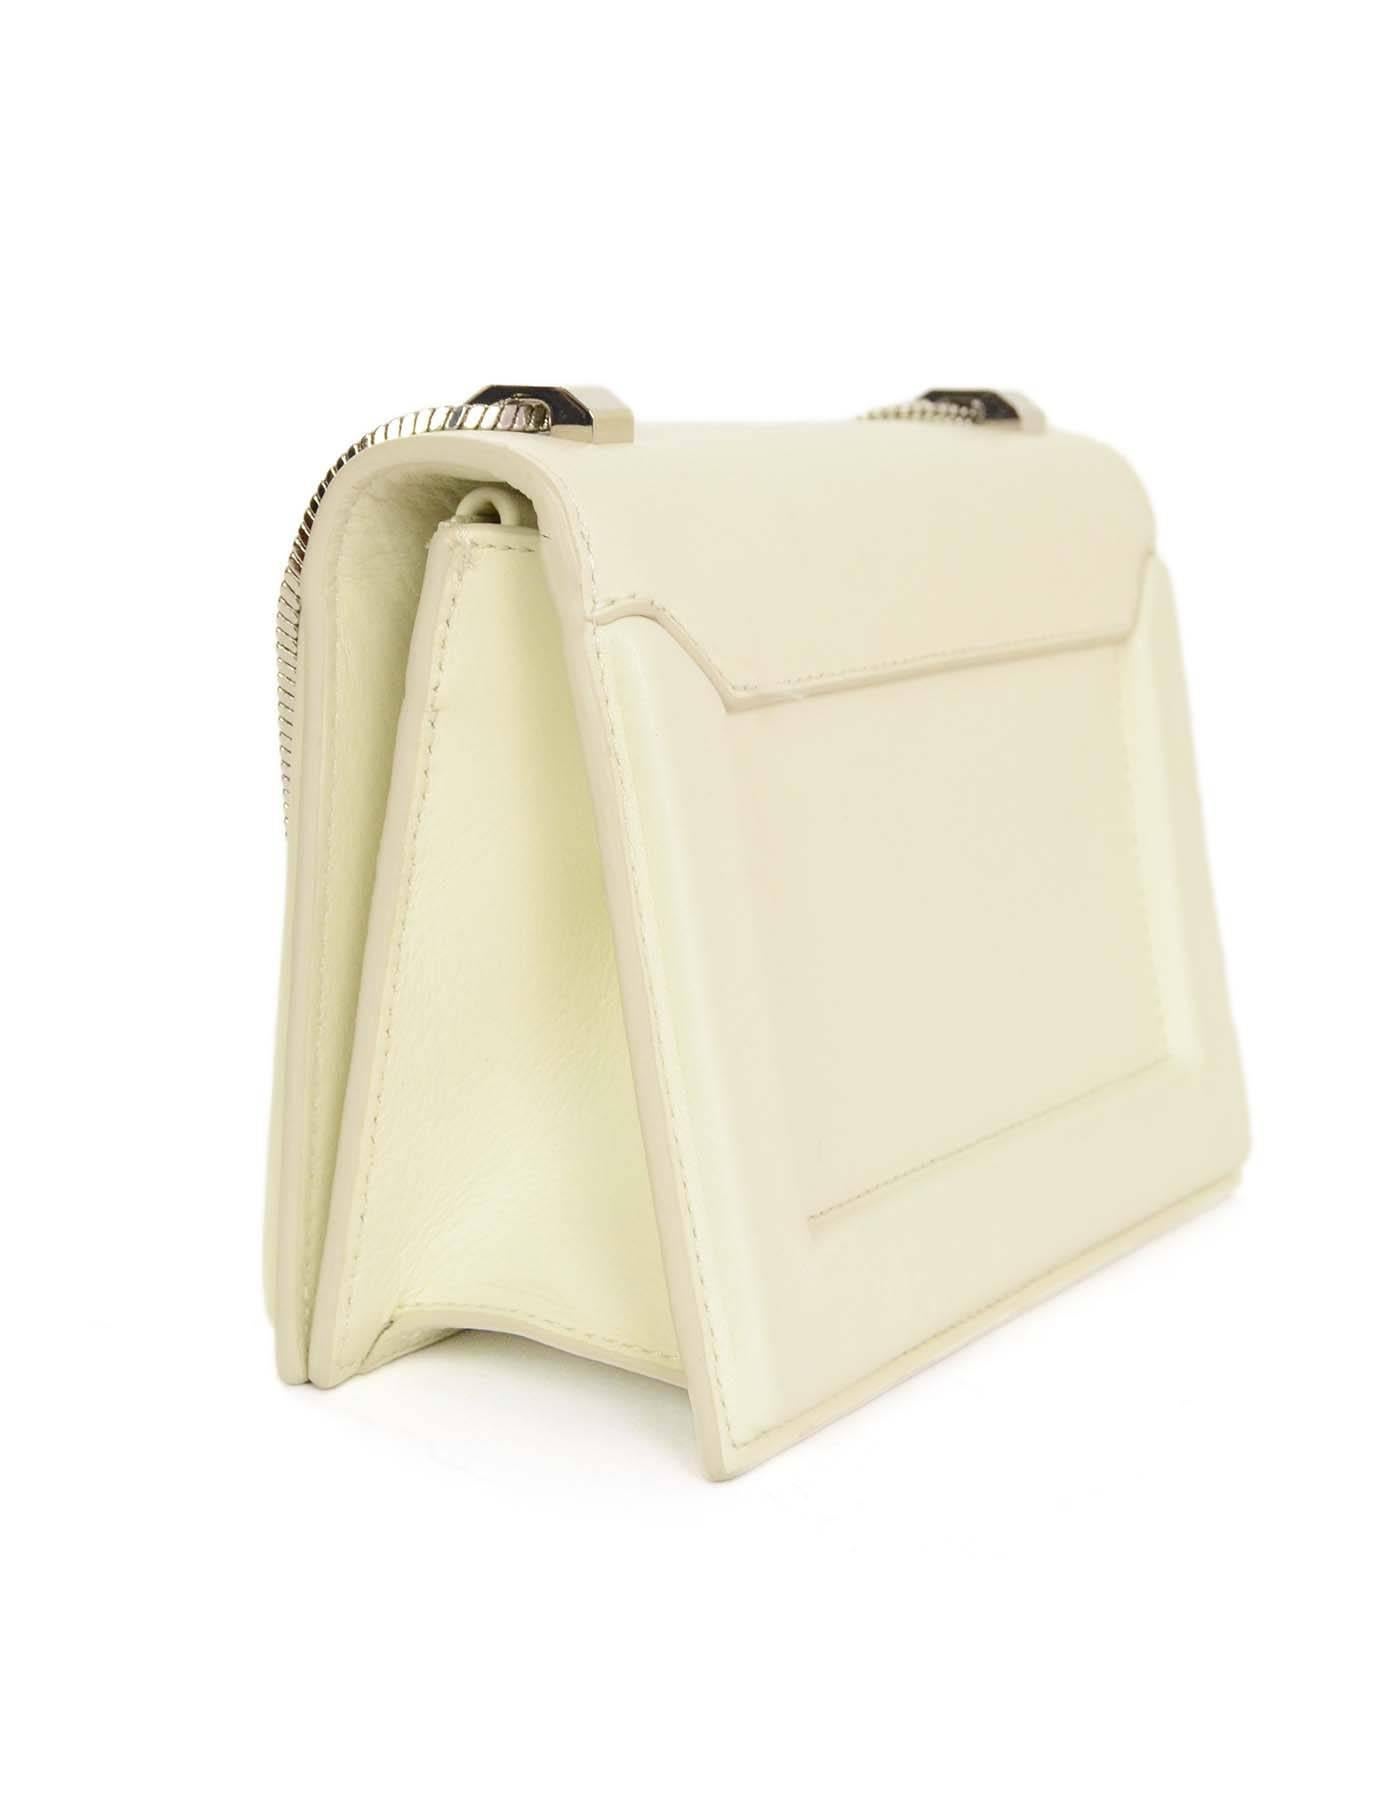  3.1 Philip Lim Ivory Mini Structured Flap Shoulder Bag SHW rt. $695 In Excellent Condition In New York, NY